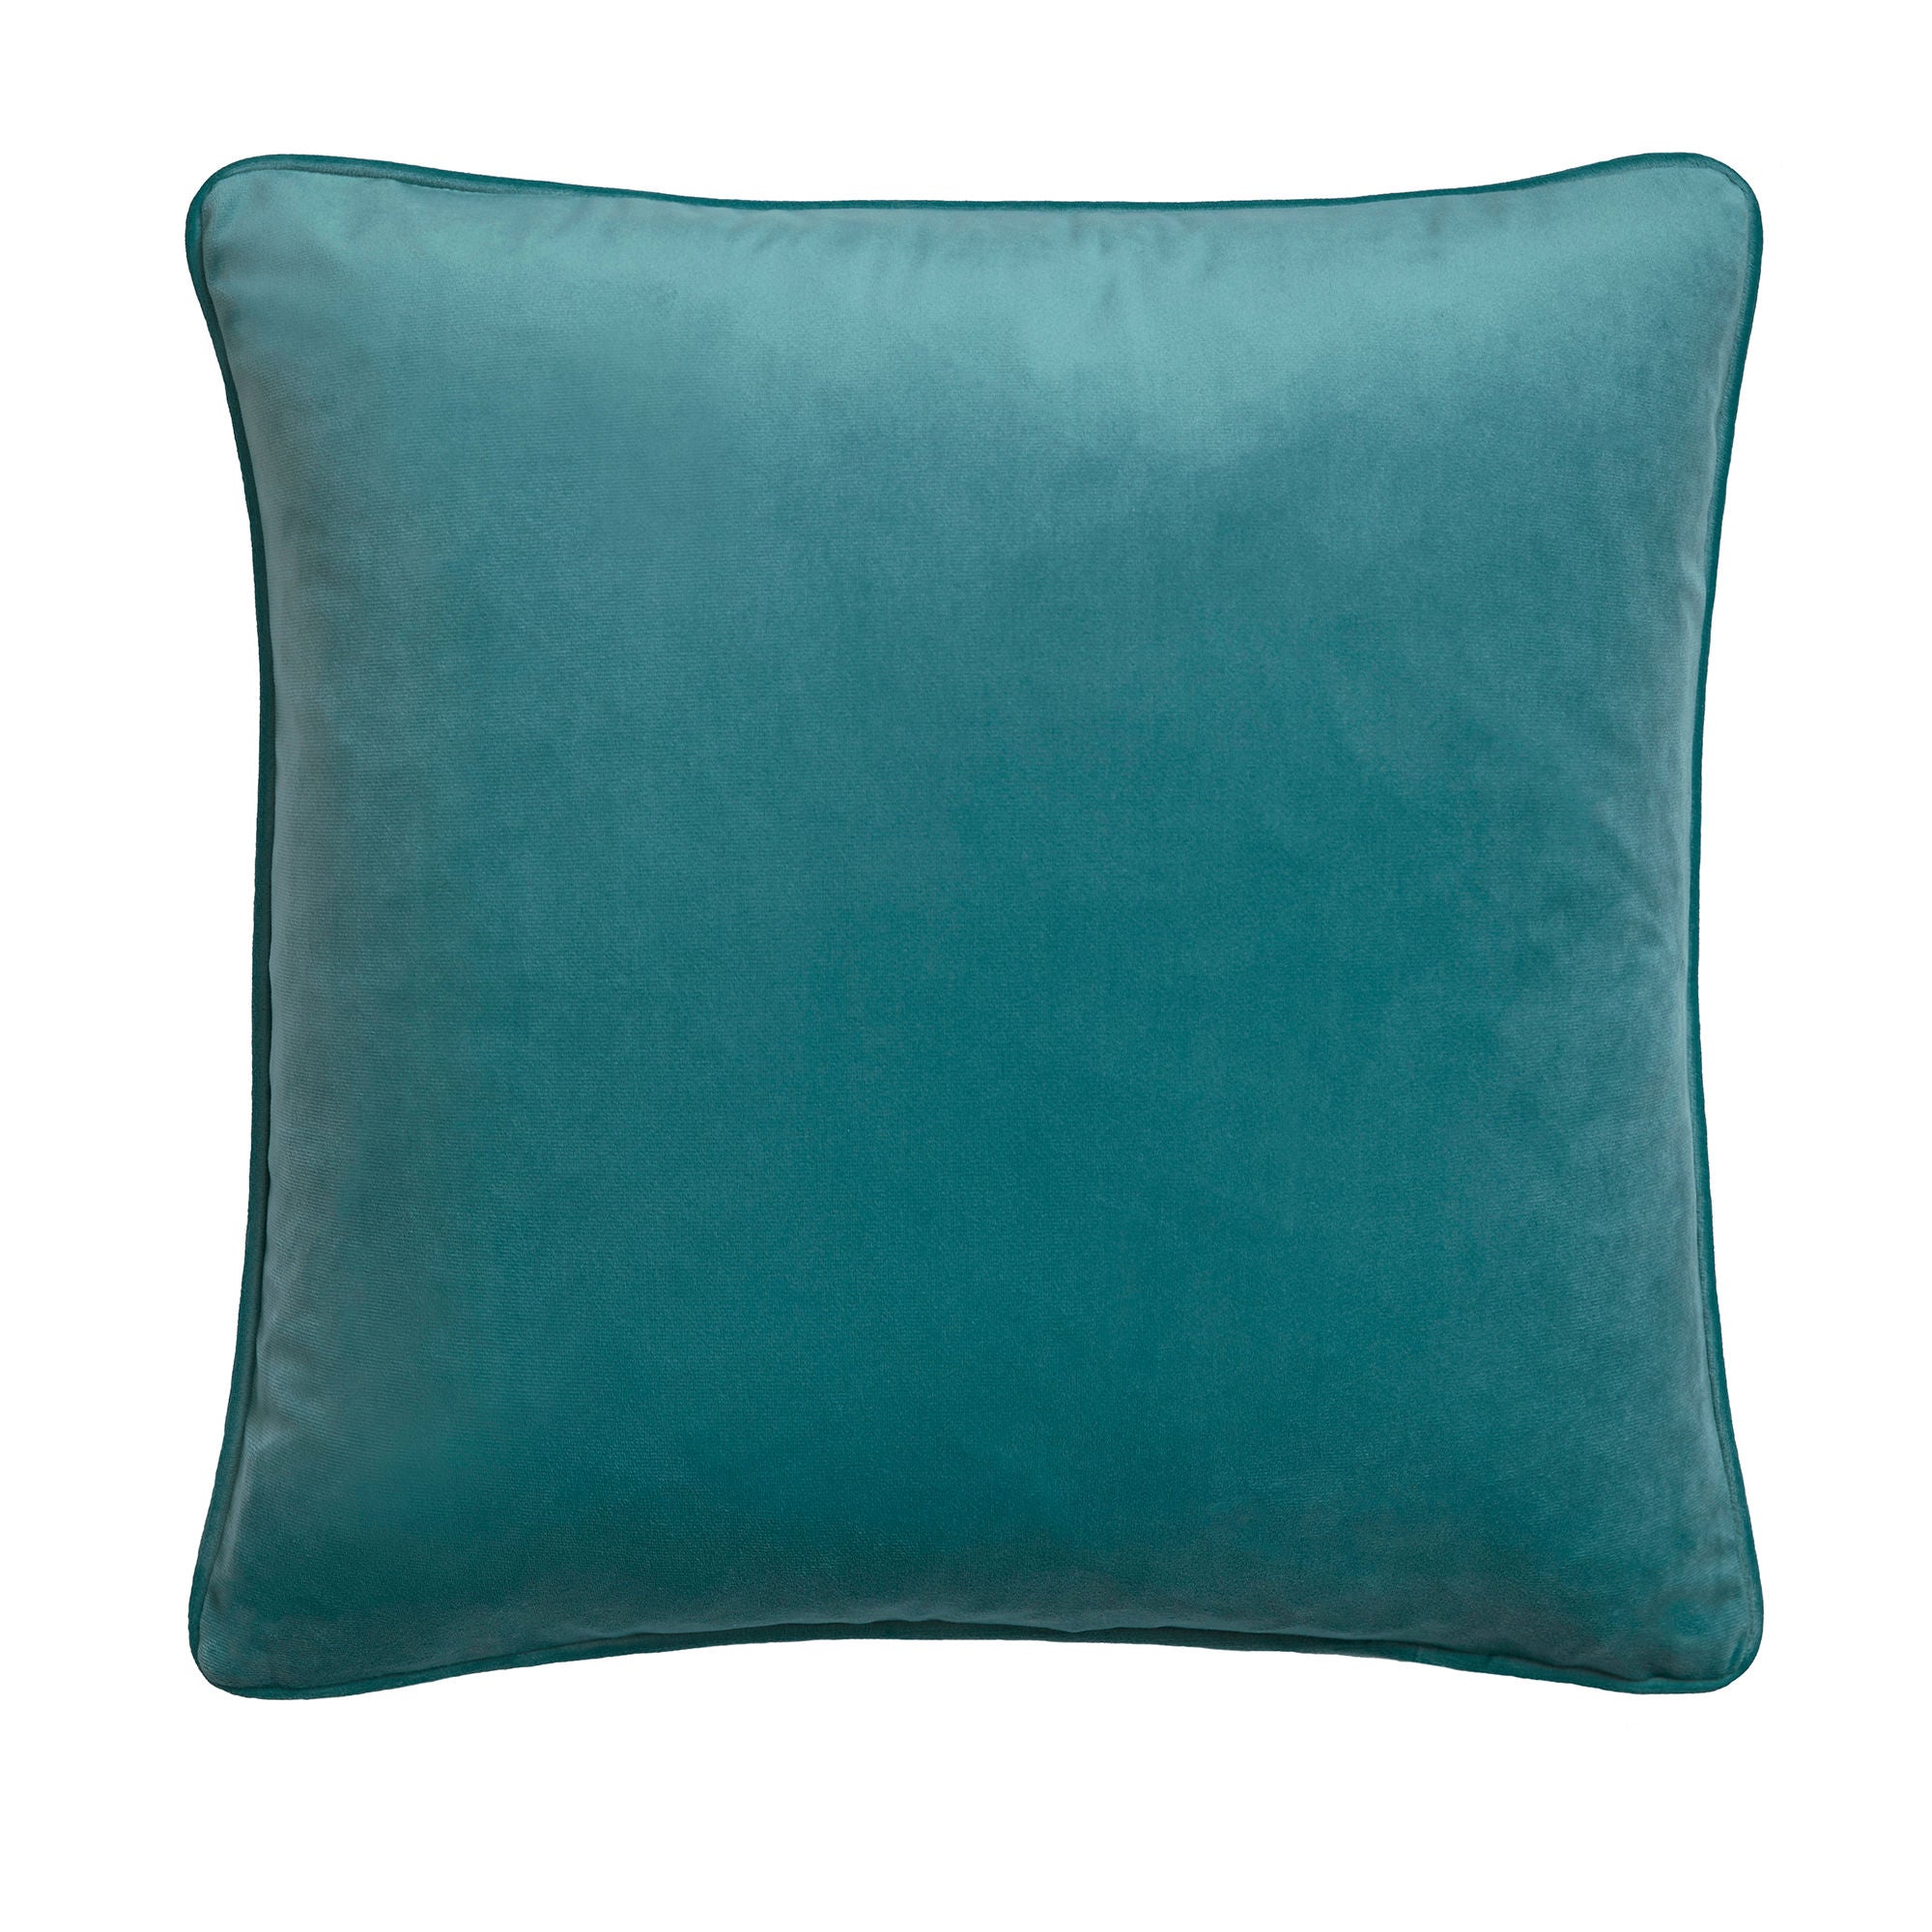 Montrose Cushion by Laurence Llewelyn-Bowen in Teal 43 x 43cm - Cushion - Laurence Llewelyn-Bowen